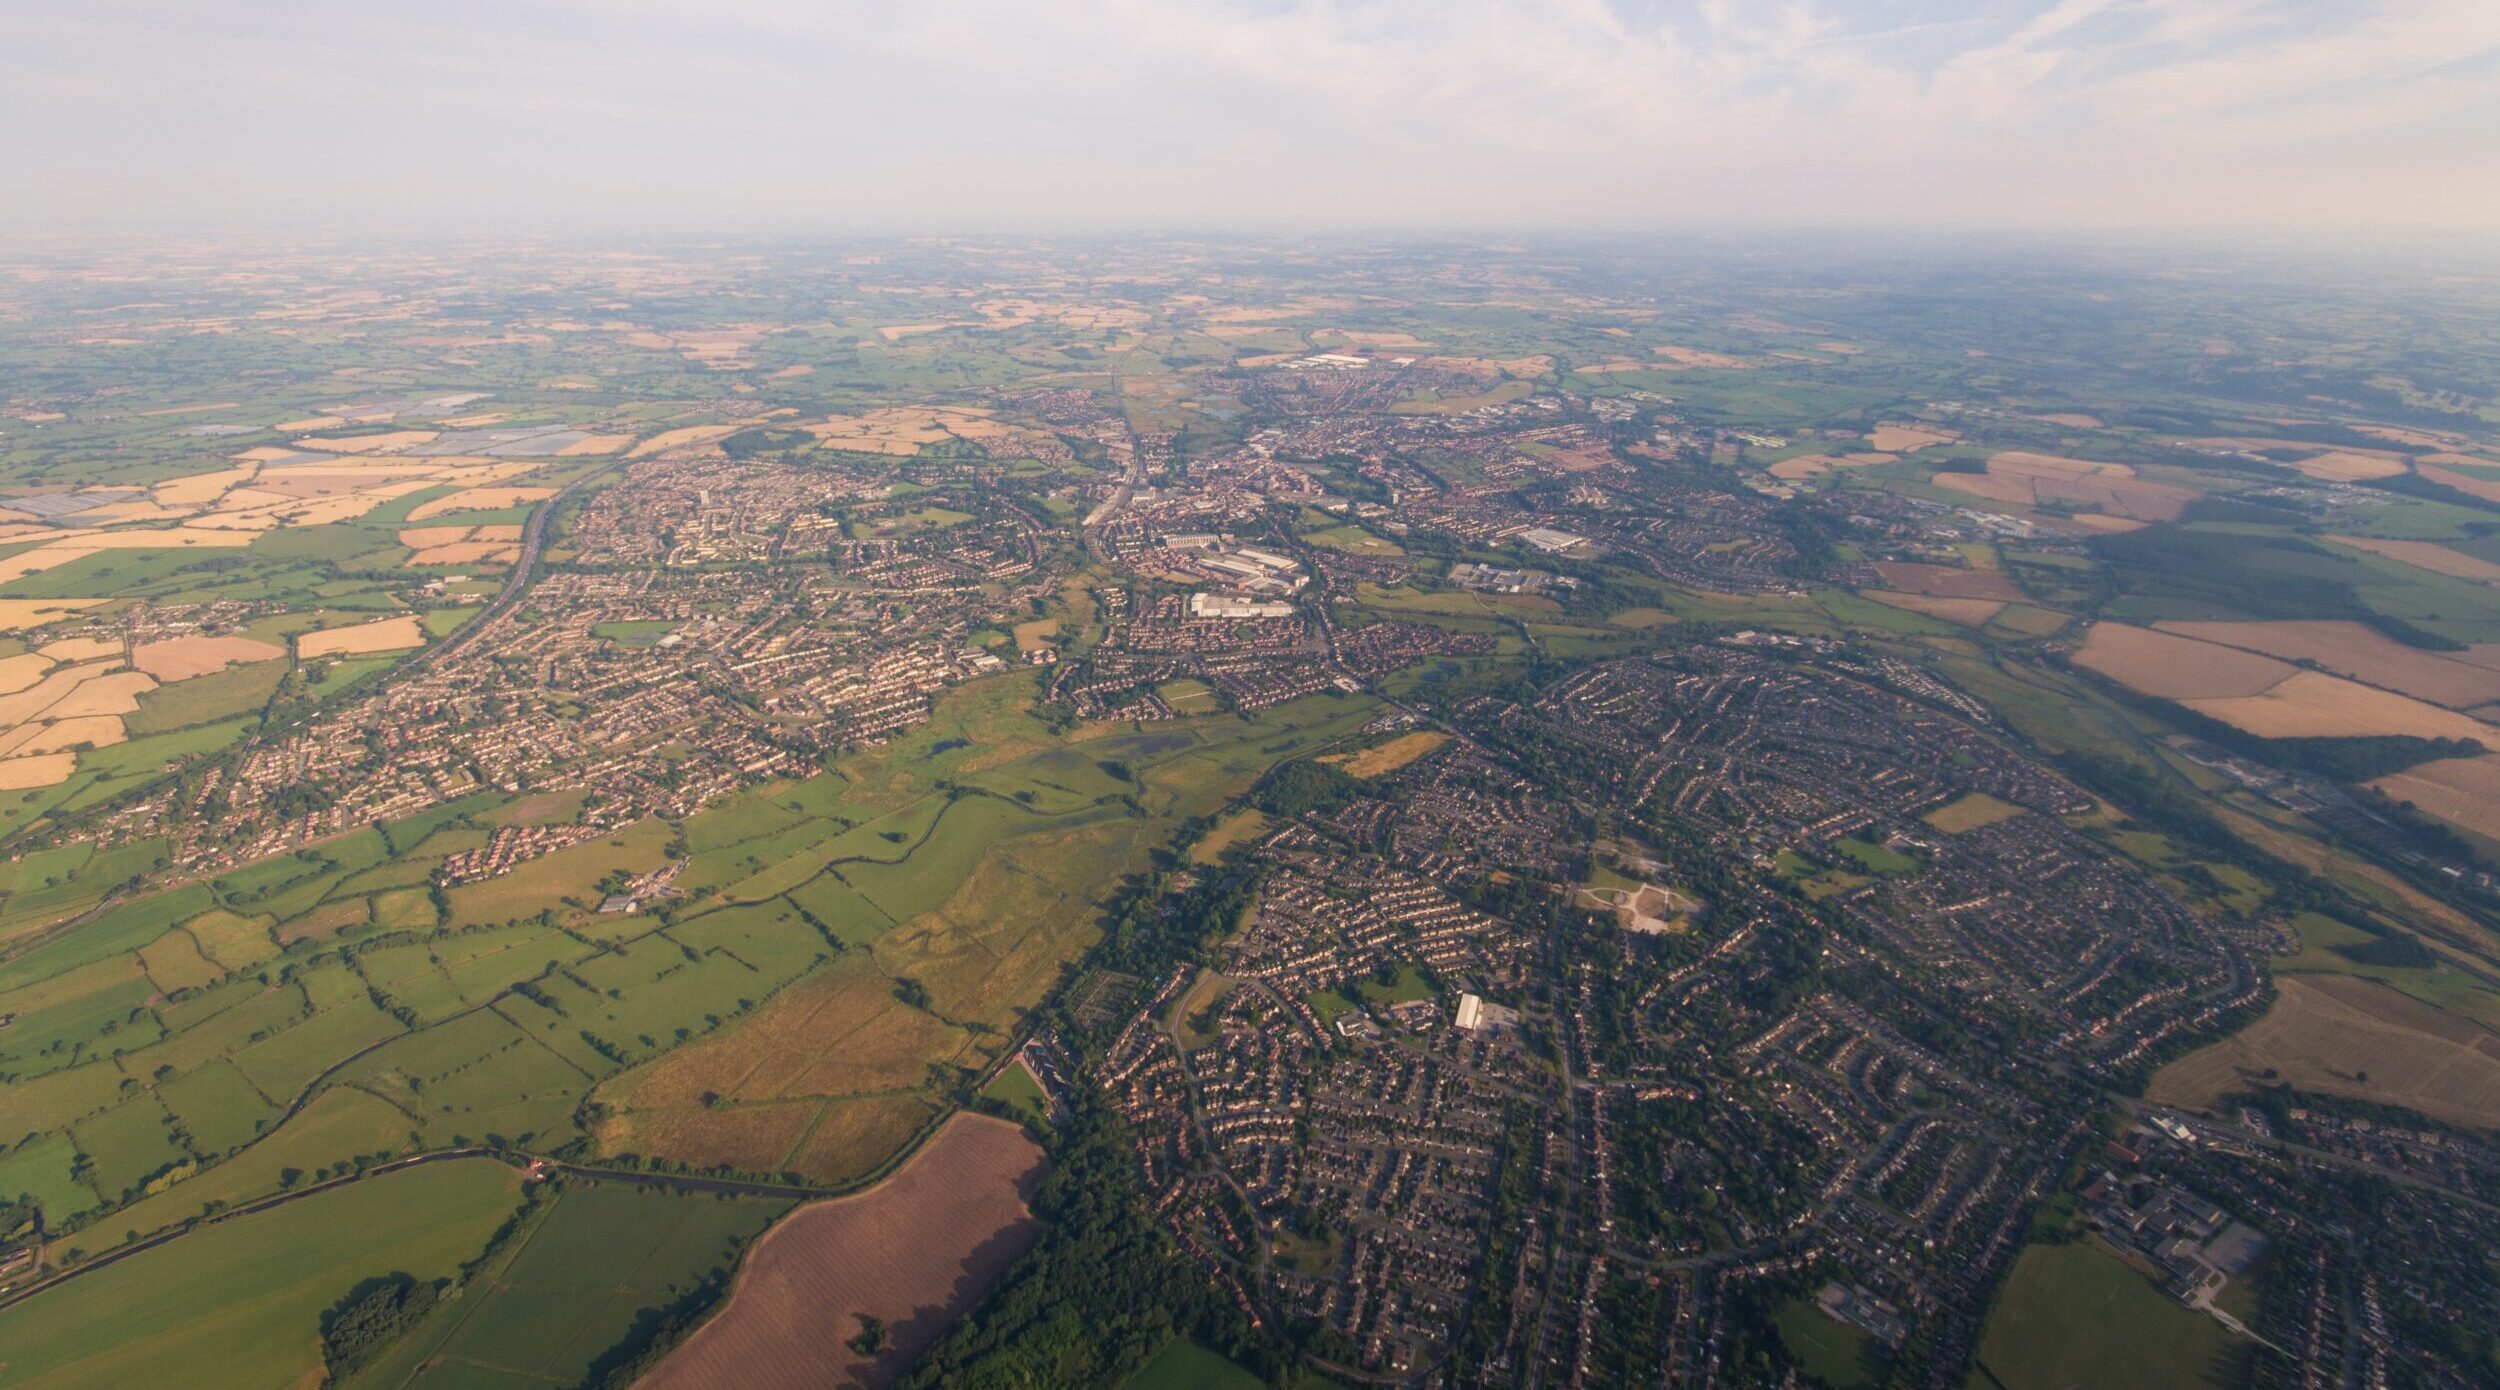 Aerial view of Stafford